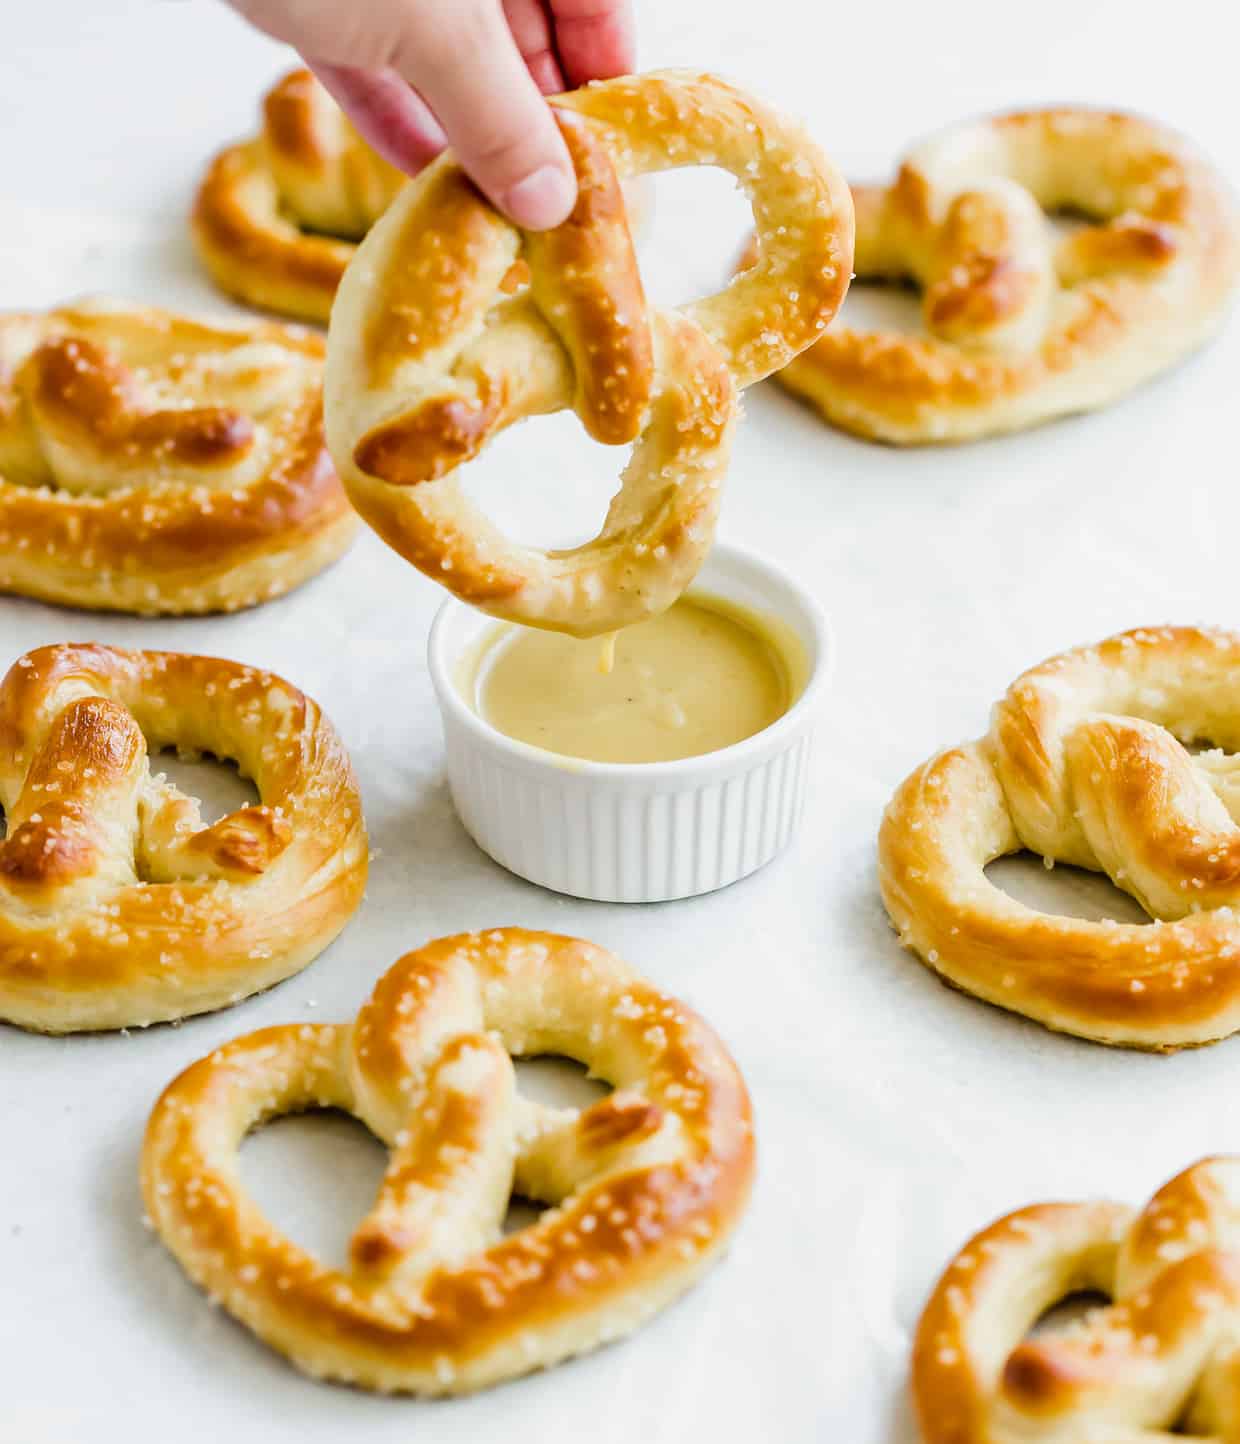 A golden brown pretzel sprinkled with coarse salt being dipped into a small bowl of honey mustard sauce.